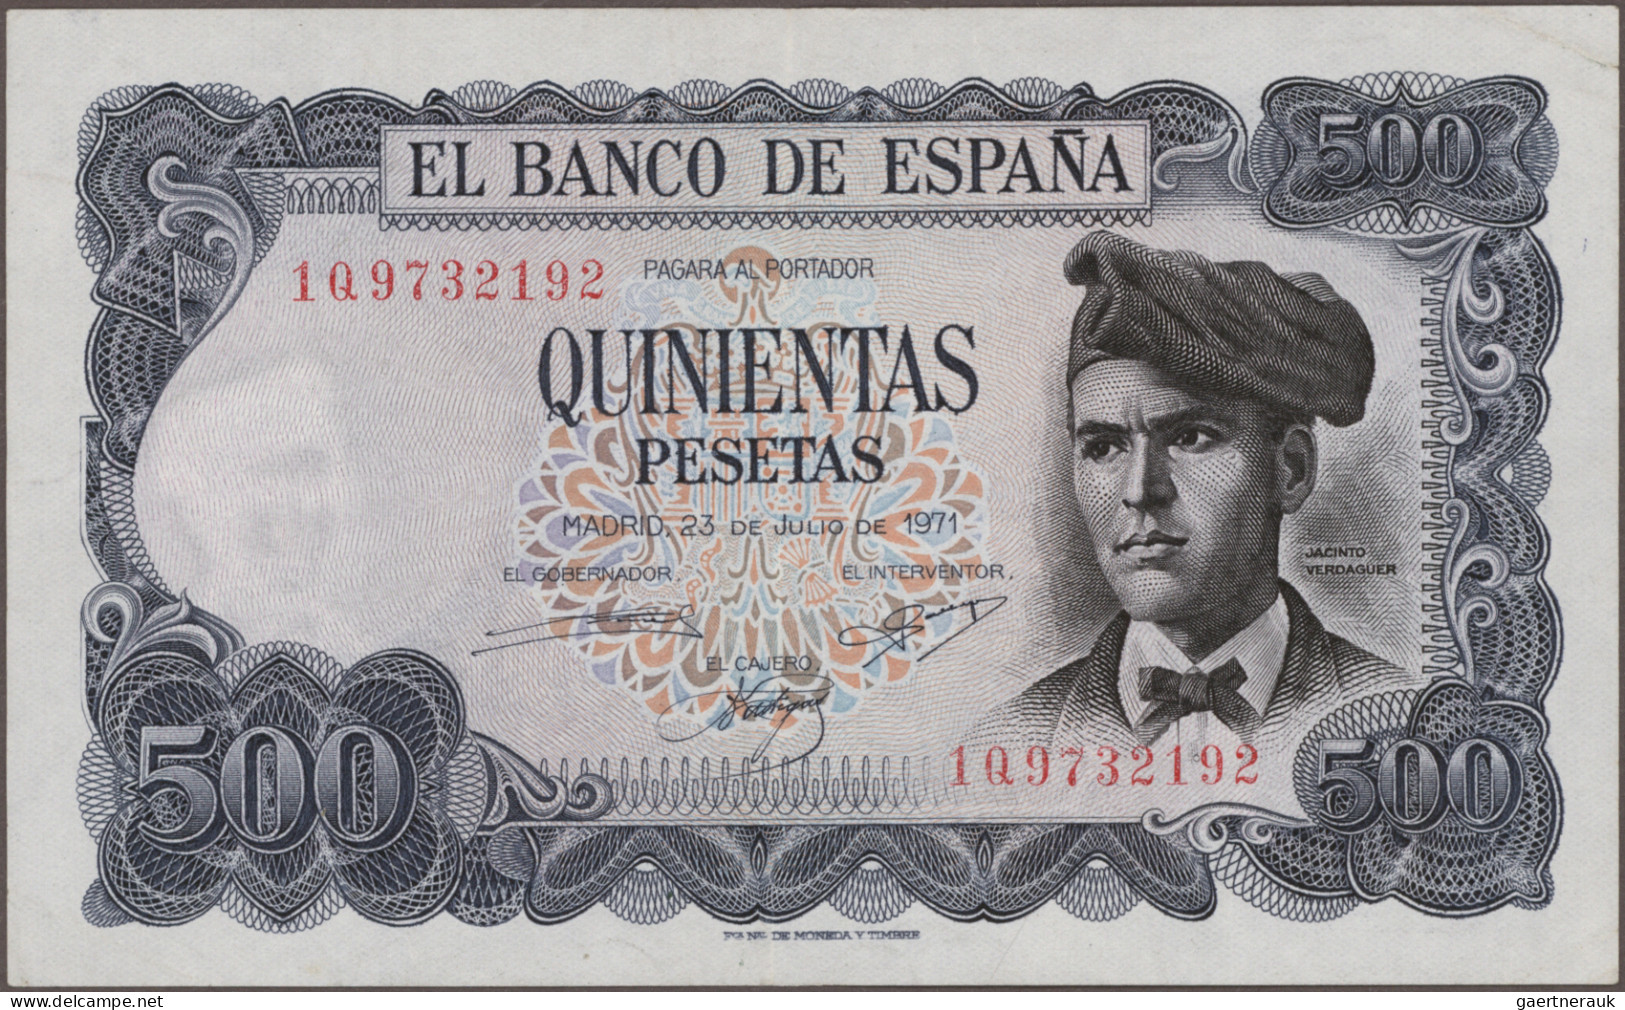 Worldwide: Very nice collection of more than 690 banknotes from all over the wor